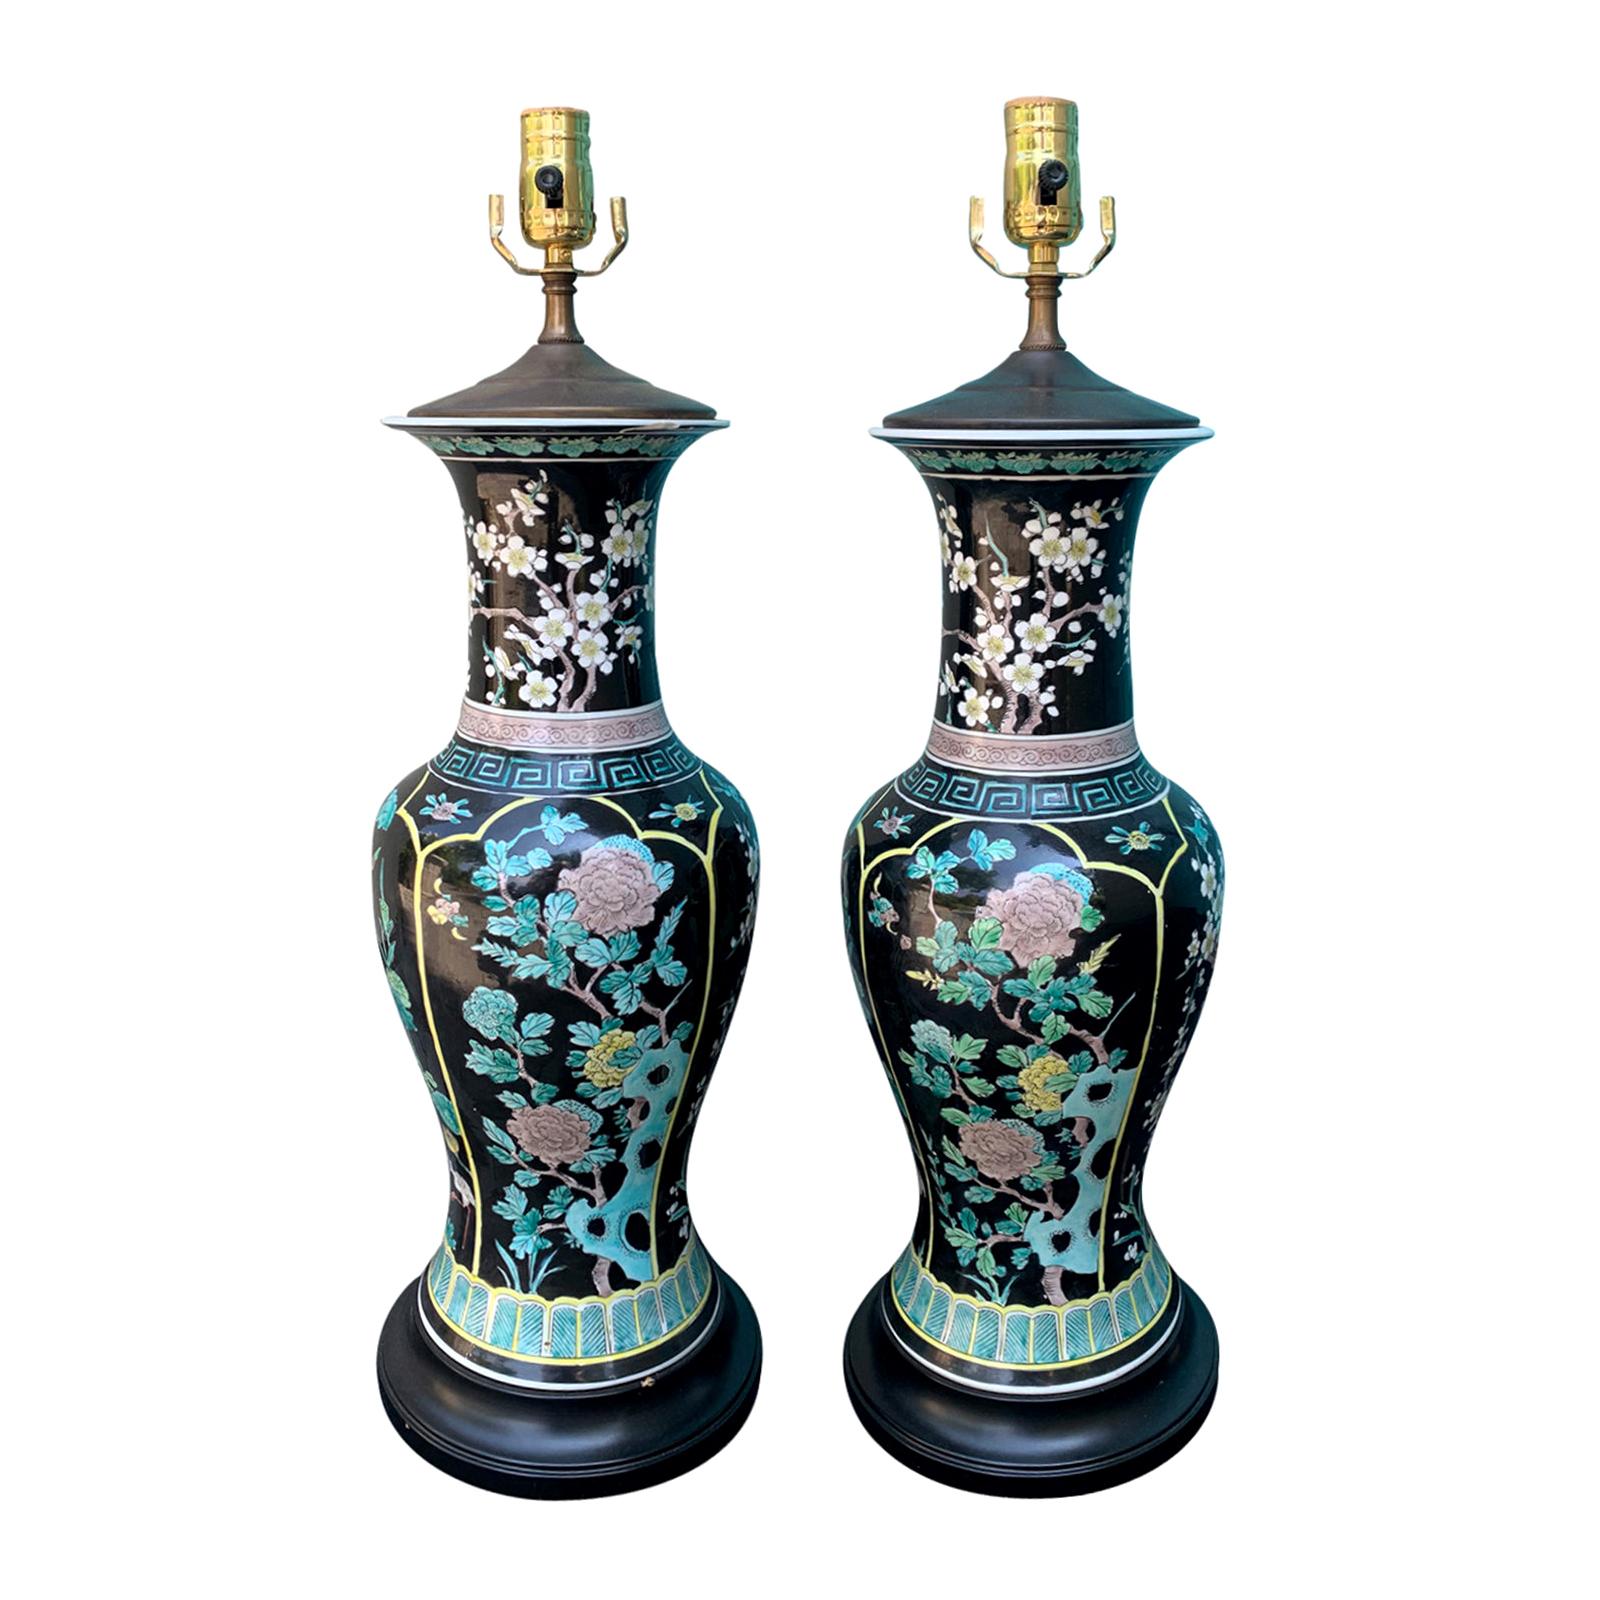 Pair of 20th Century Chinese Famille Noir Porcelain Lamps